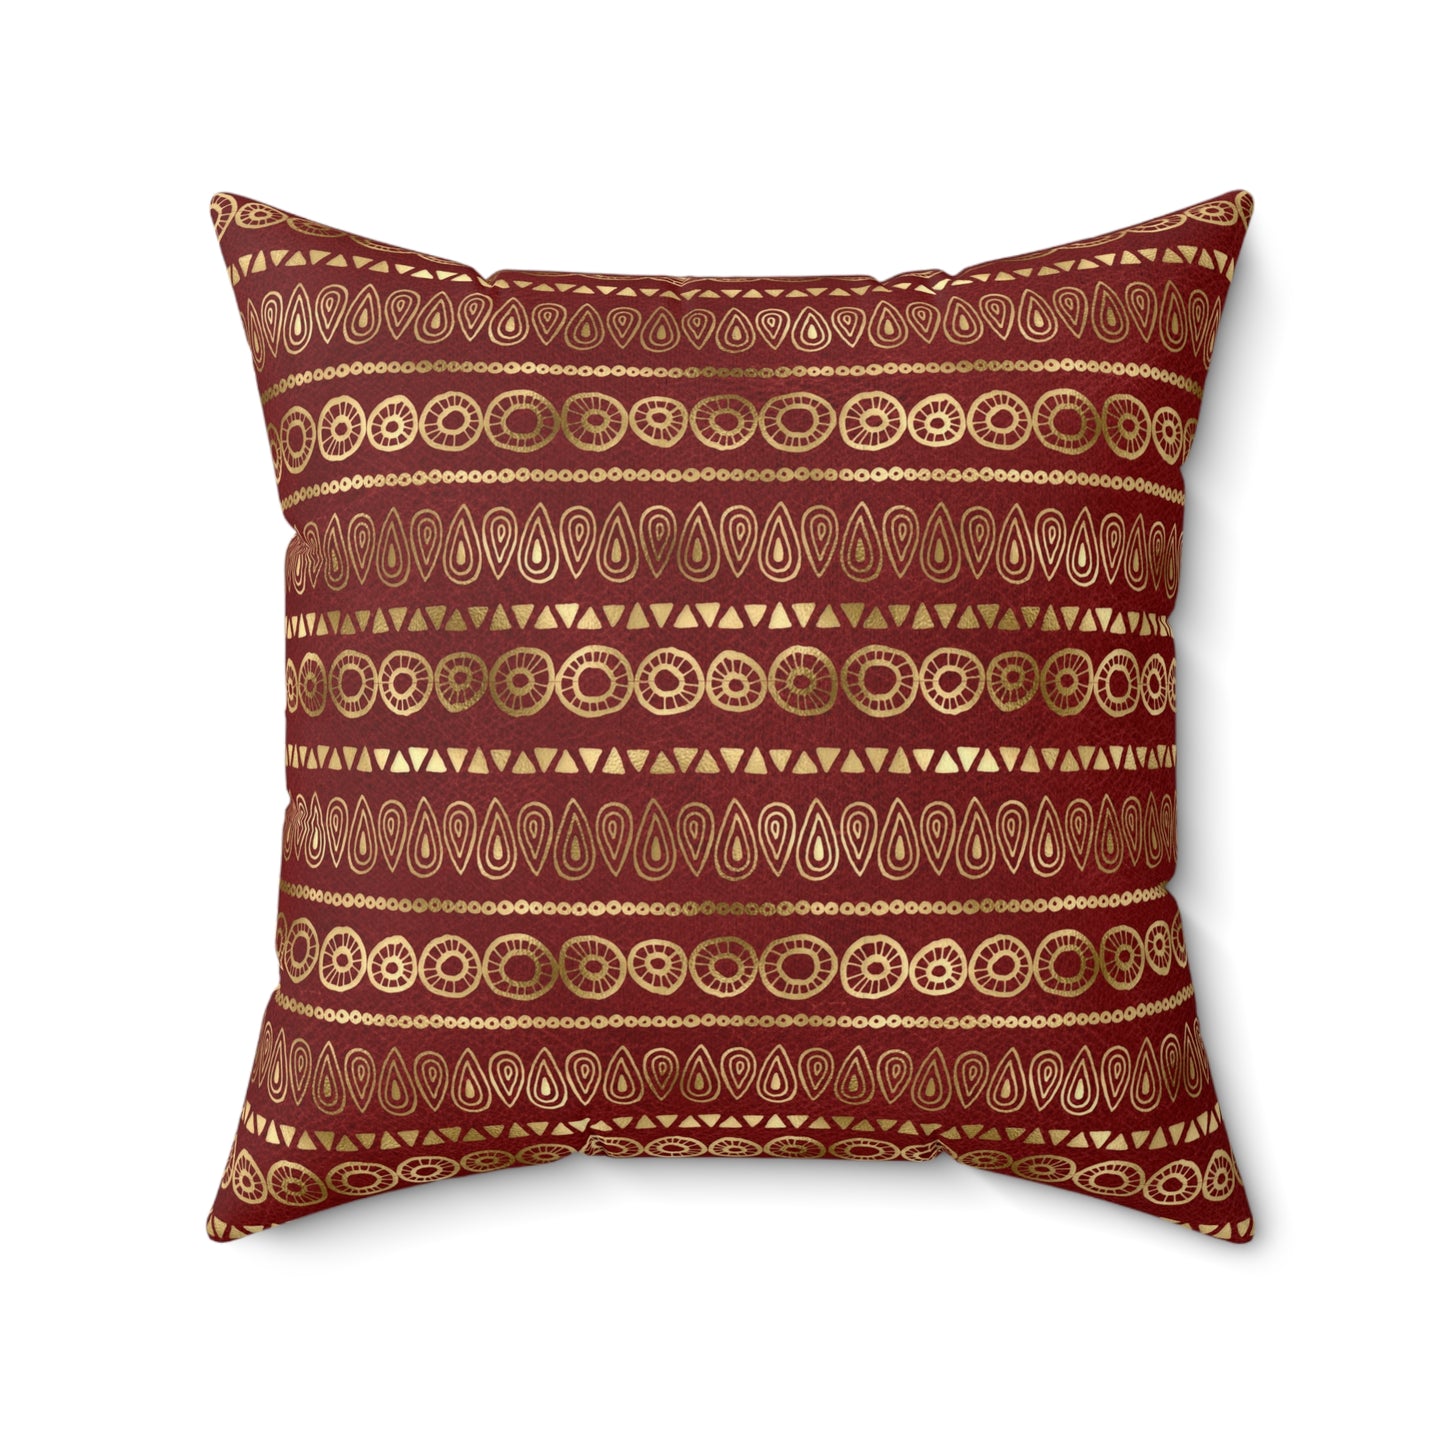 Scarlett and Gold Boho Pattern 16 - Faux Suede Square Pillow